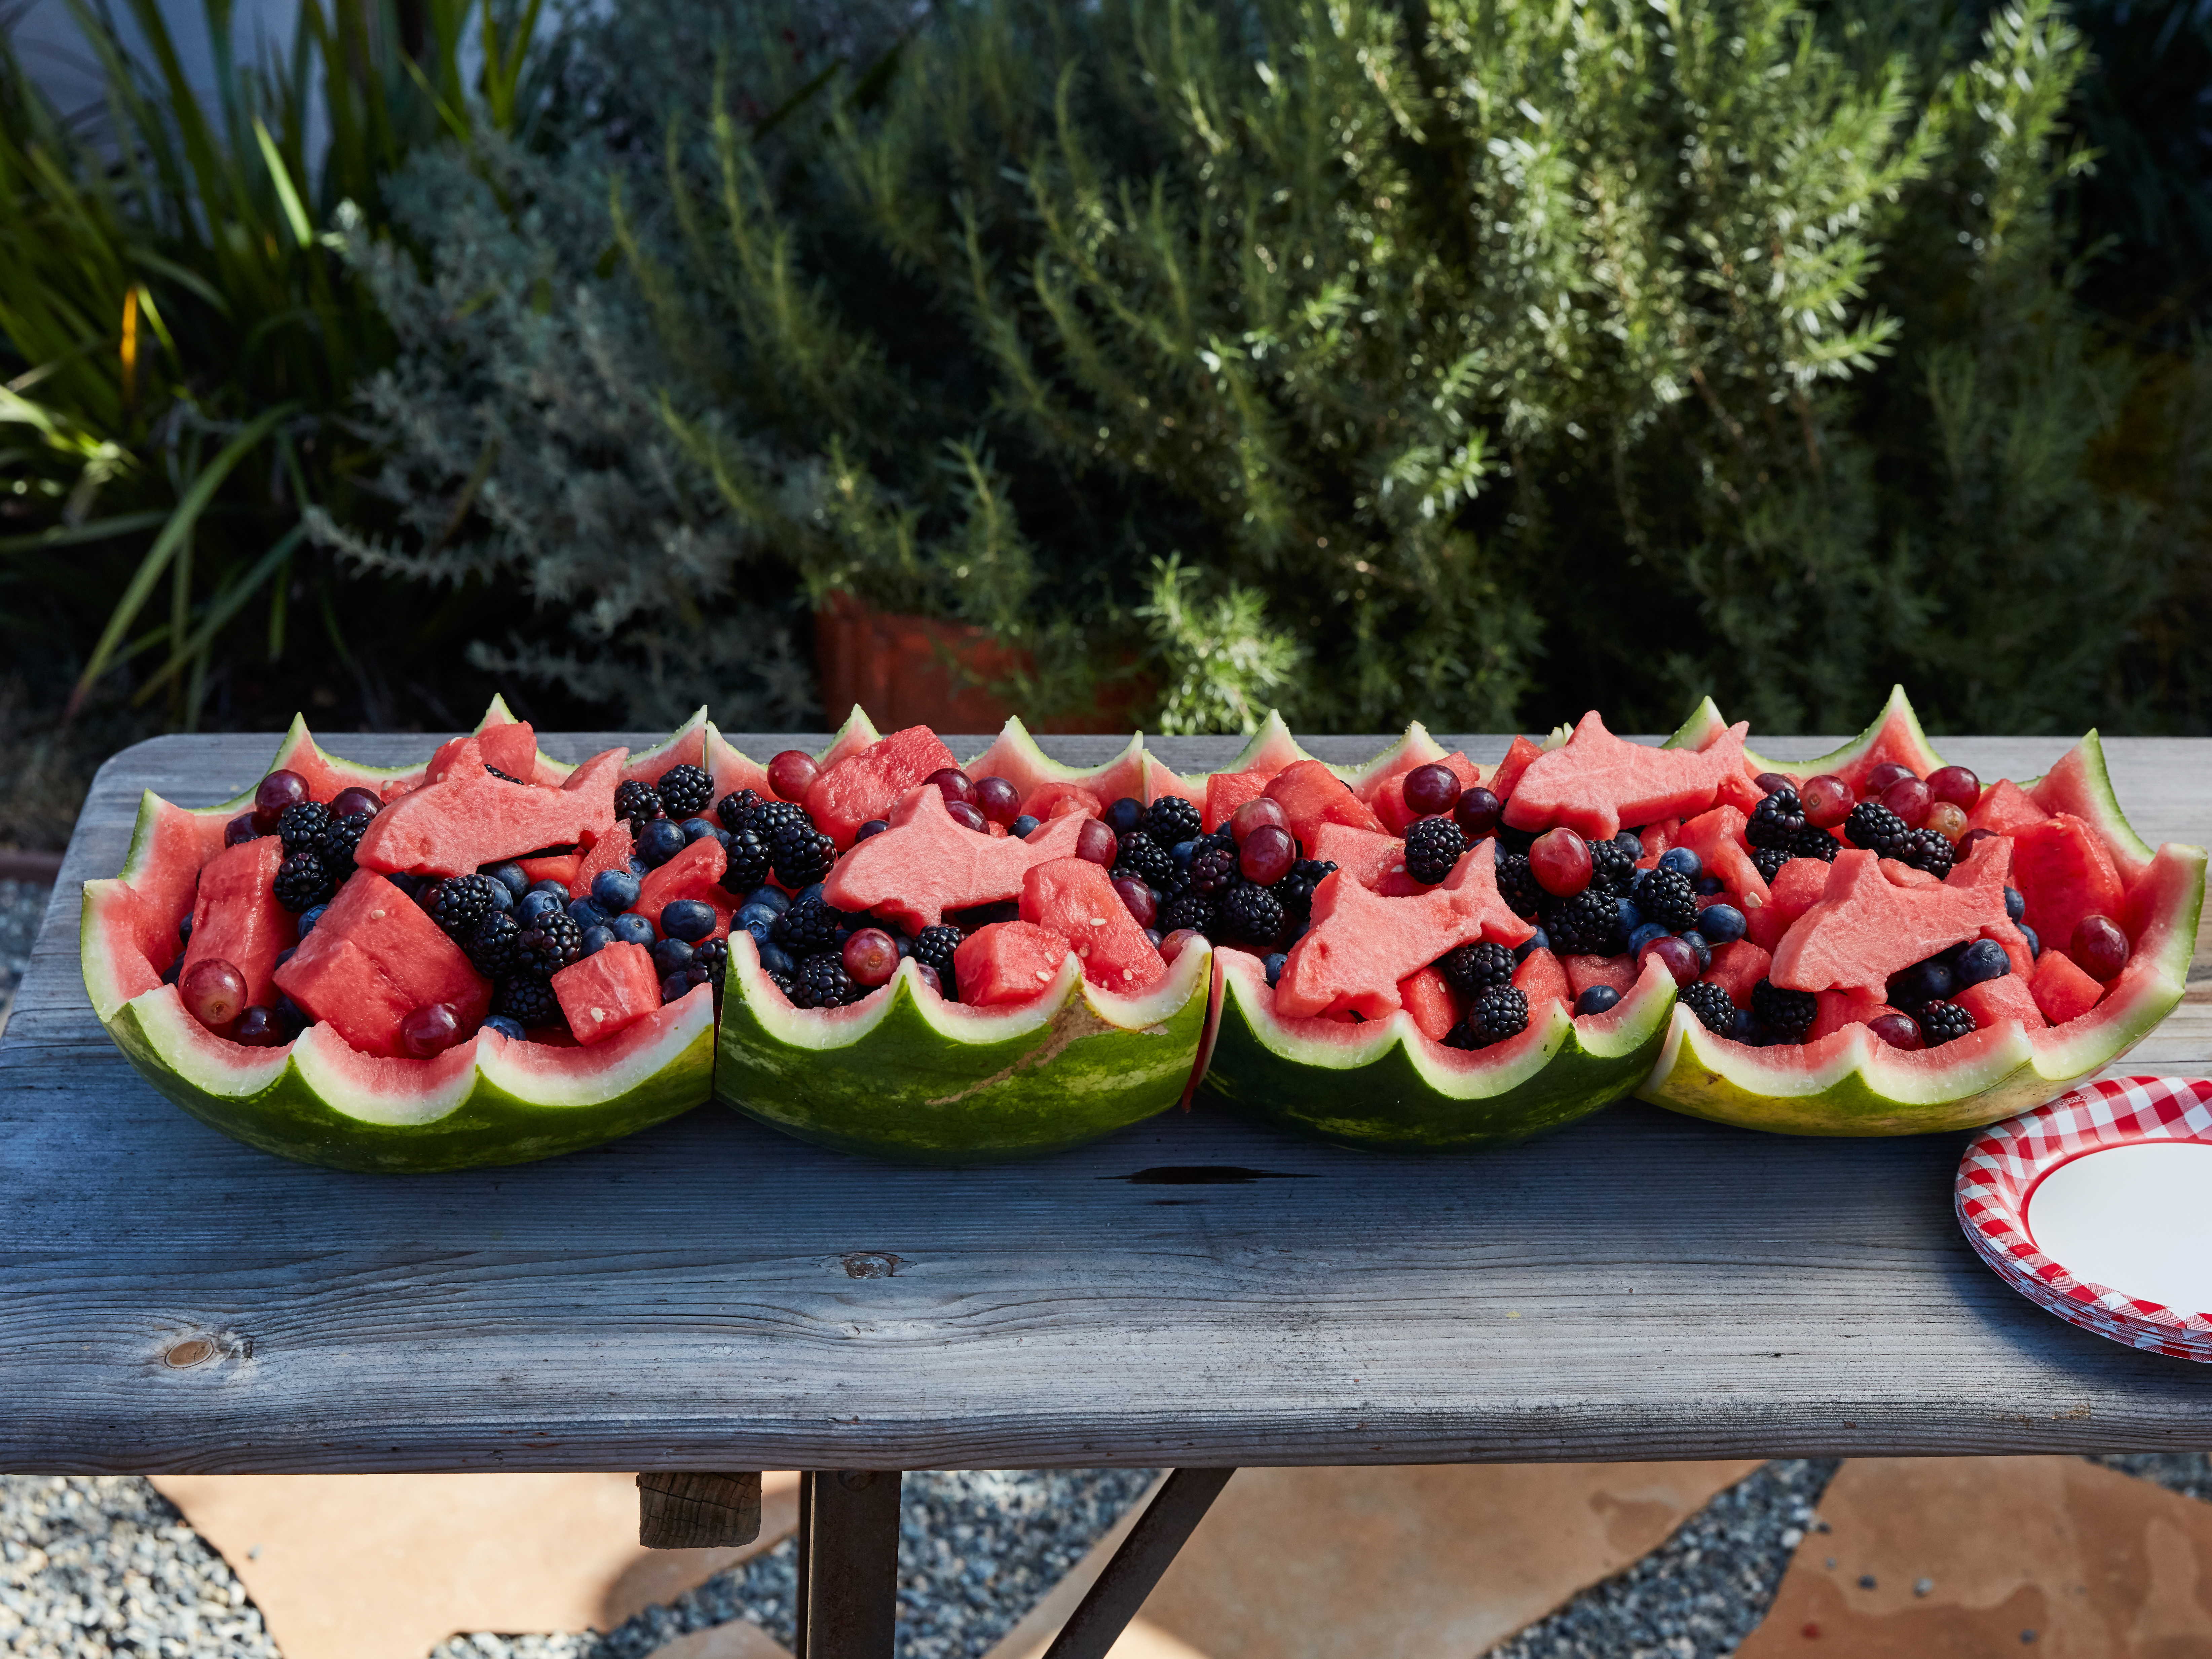 Shark And Waves Giant Watermelon Bowl Recipe Food Network Kitchen Food Network,How To Grow Cilantro From Grocery Store